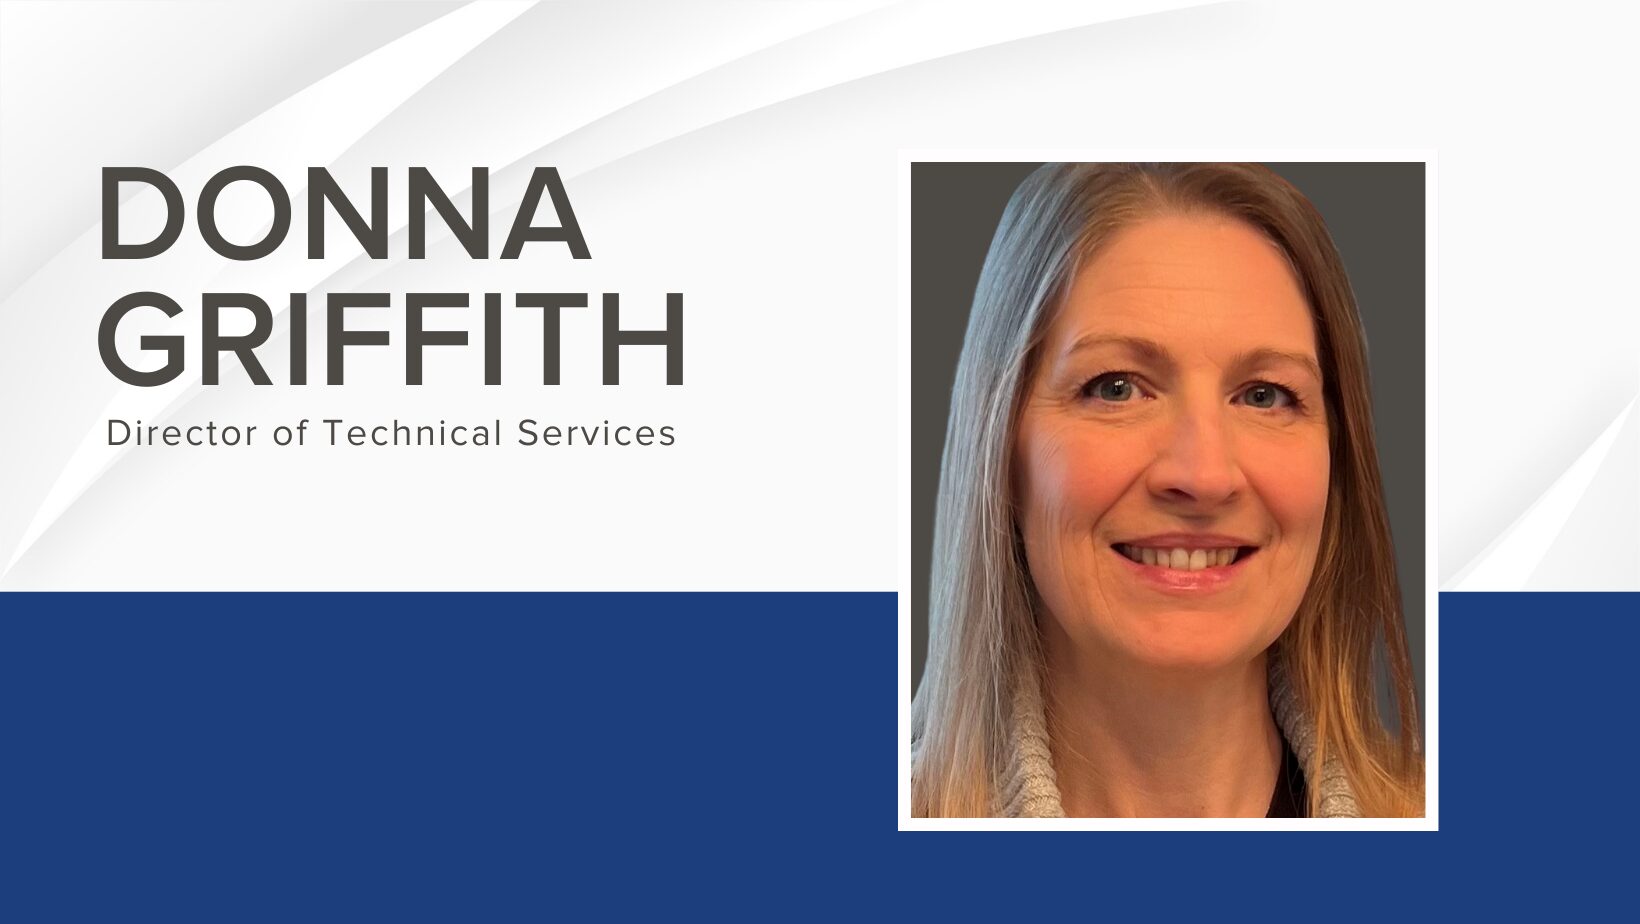 Performance Validation Welcomes Donna Griffith as Director of Technical Services